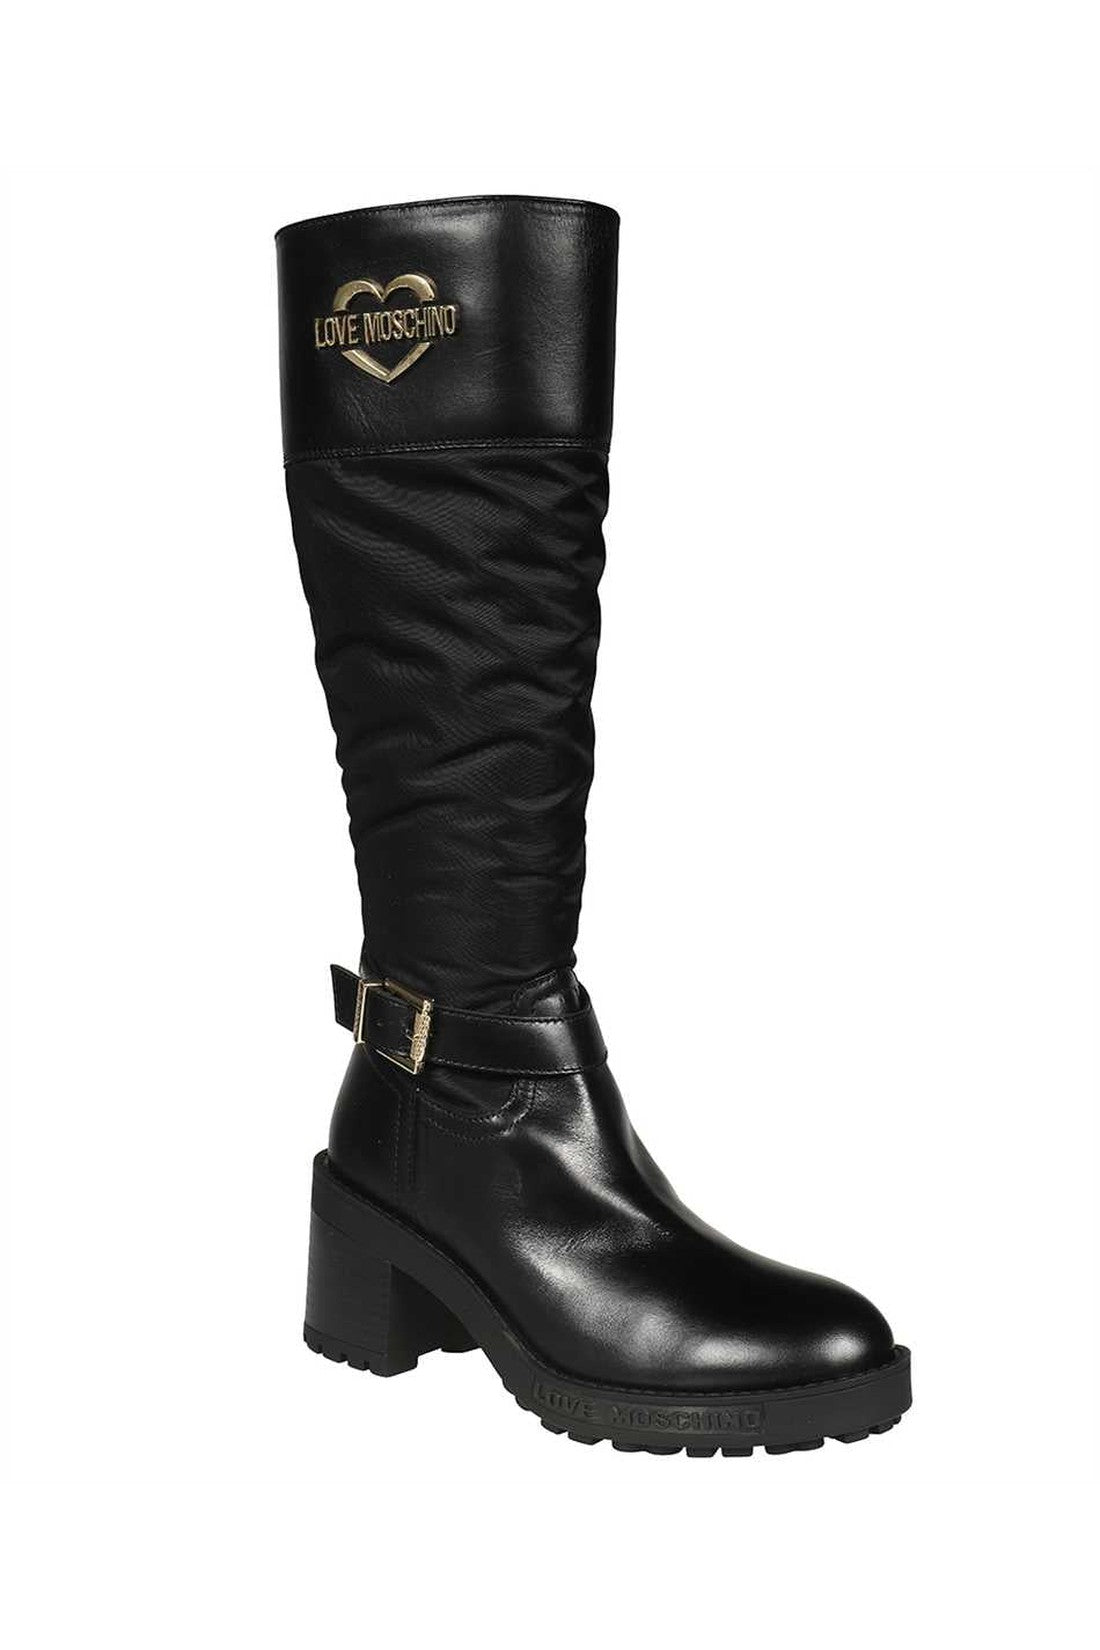 Knee-boots-Love Moschino-OUTLET-SALE-ARCHIVIST